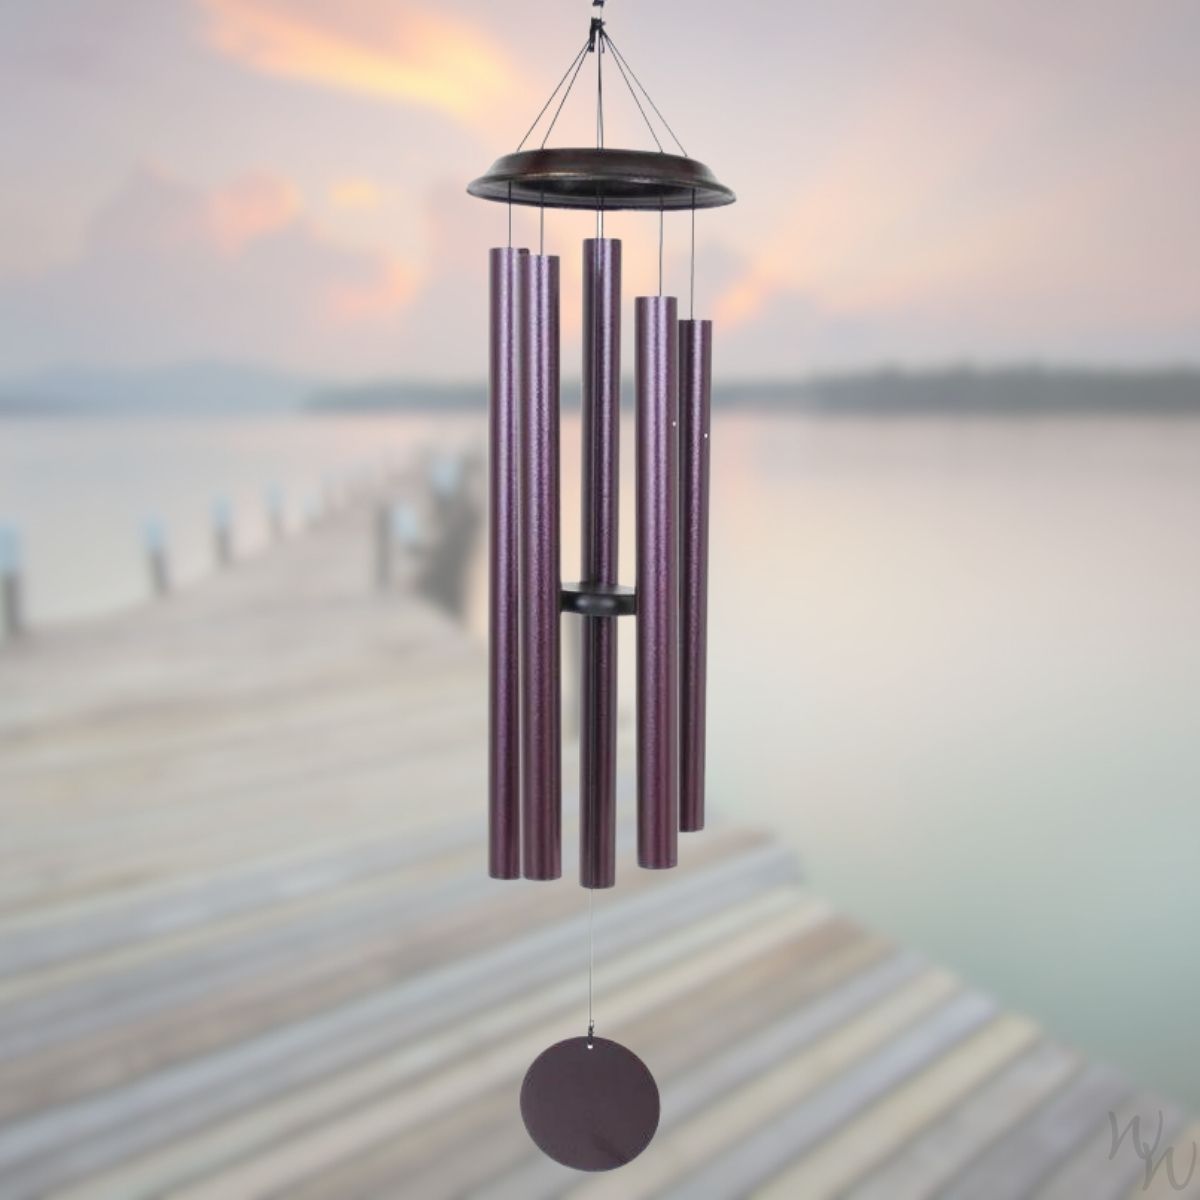 Shenandoah Melodies 59 Inch Plum Wind Chime - Scale Of G